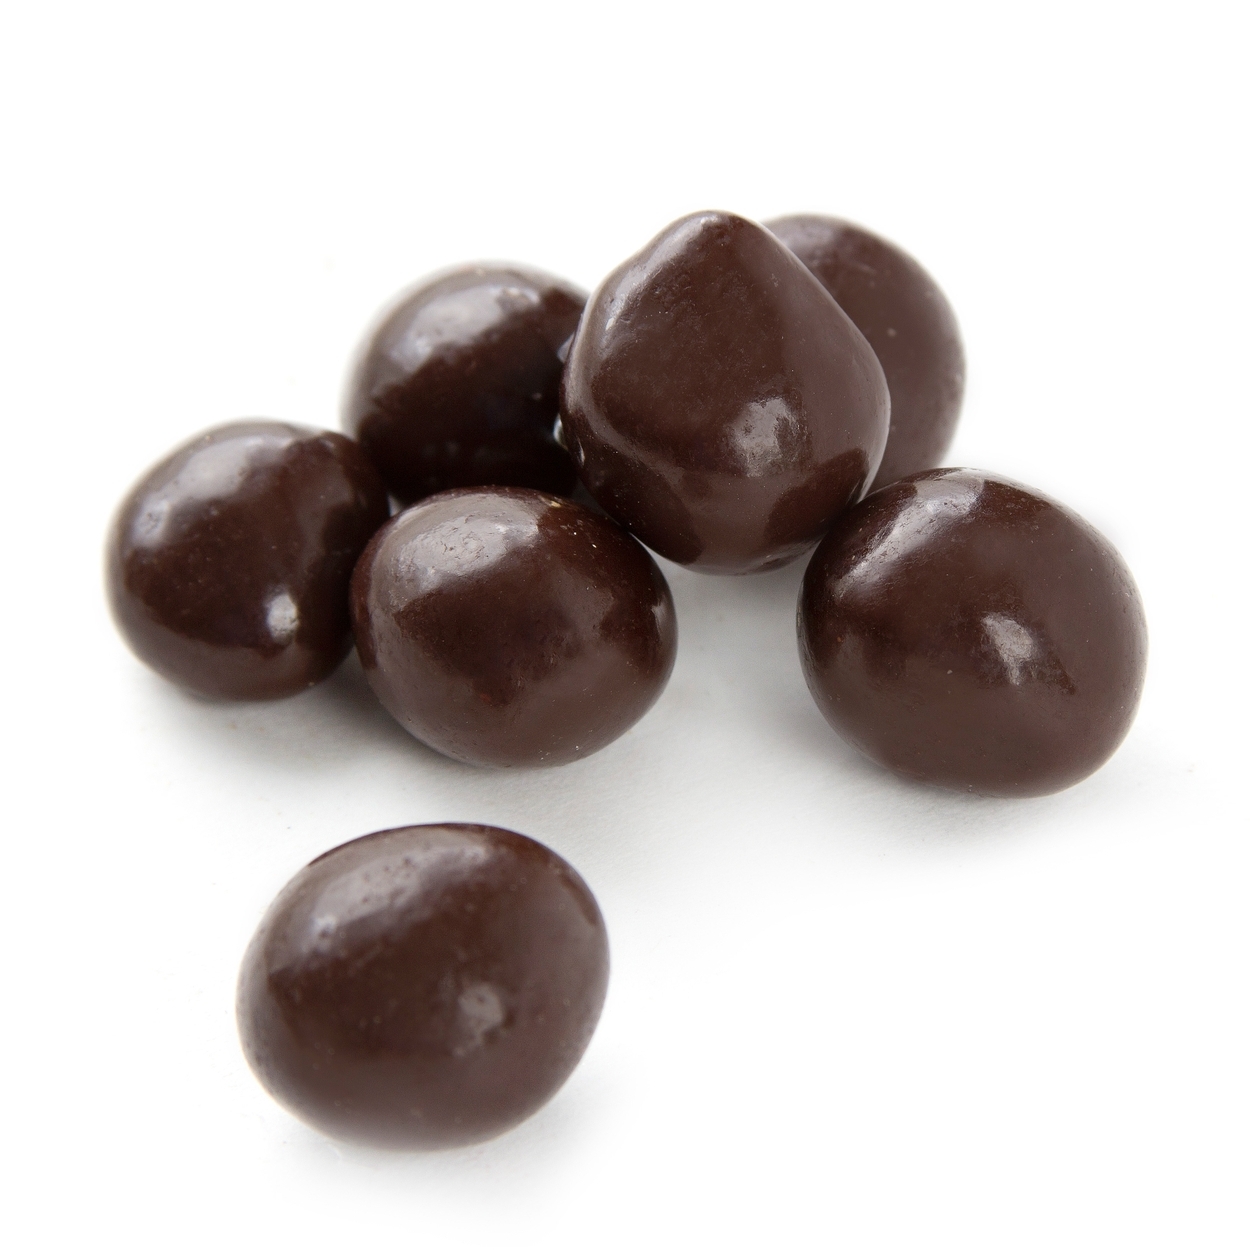 Bedford Candies - Bedford - Get your fresh dipped chocolate